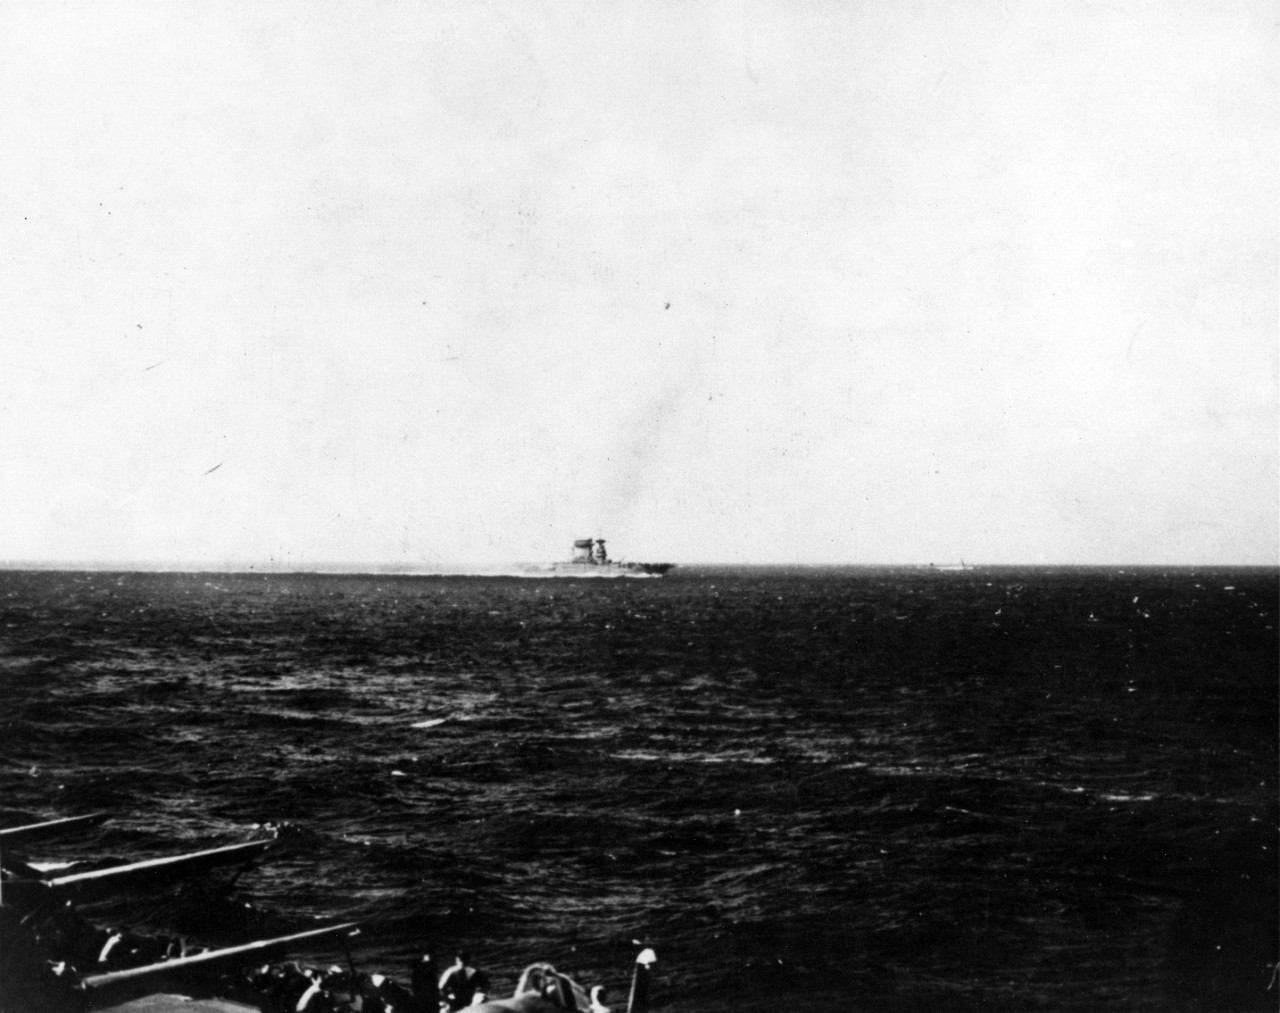 Photo #: 80-G-16566  Battle of the Coral Sea, May 1942